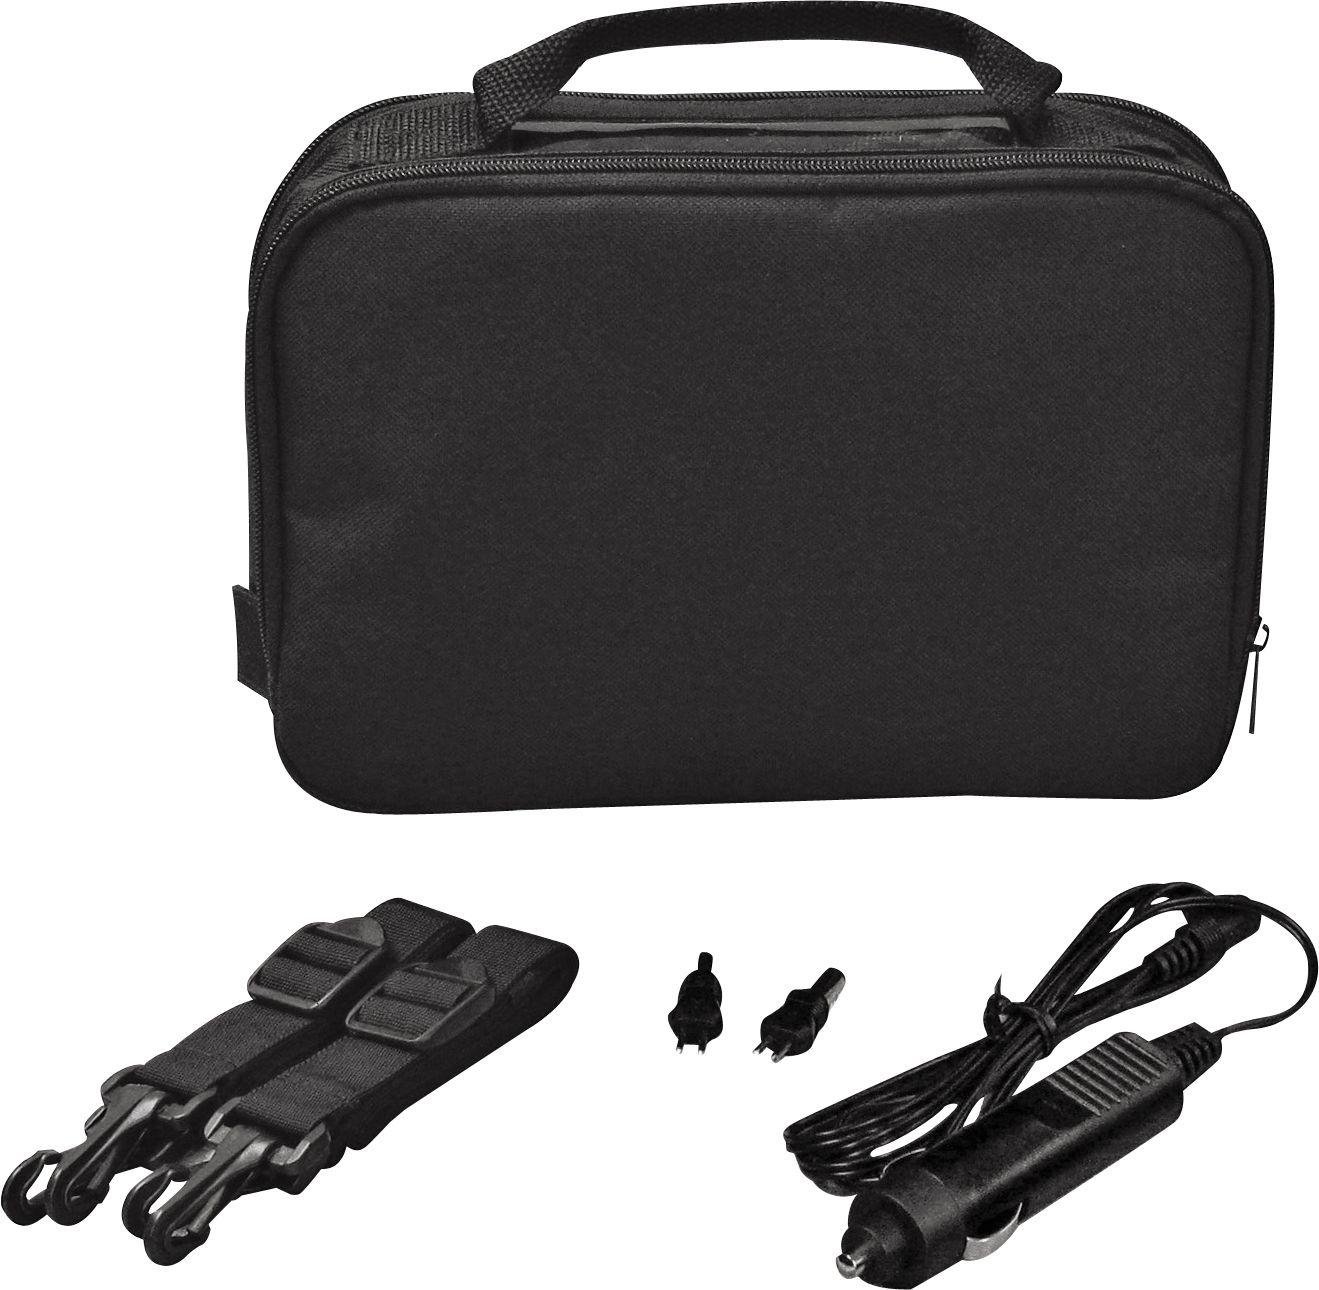 10 Inch Gadget Bag with Car Charger Review